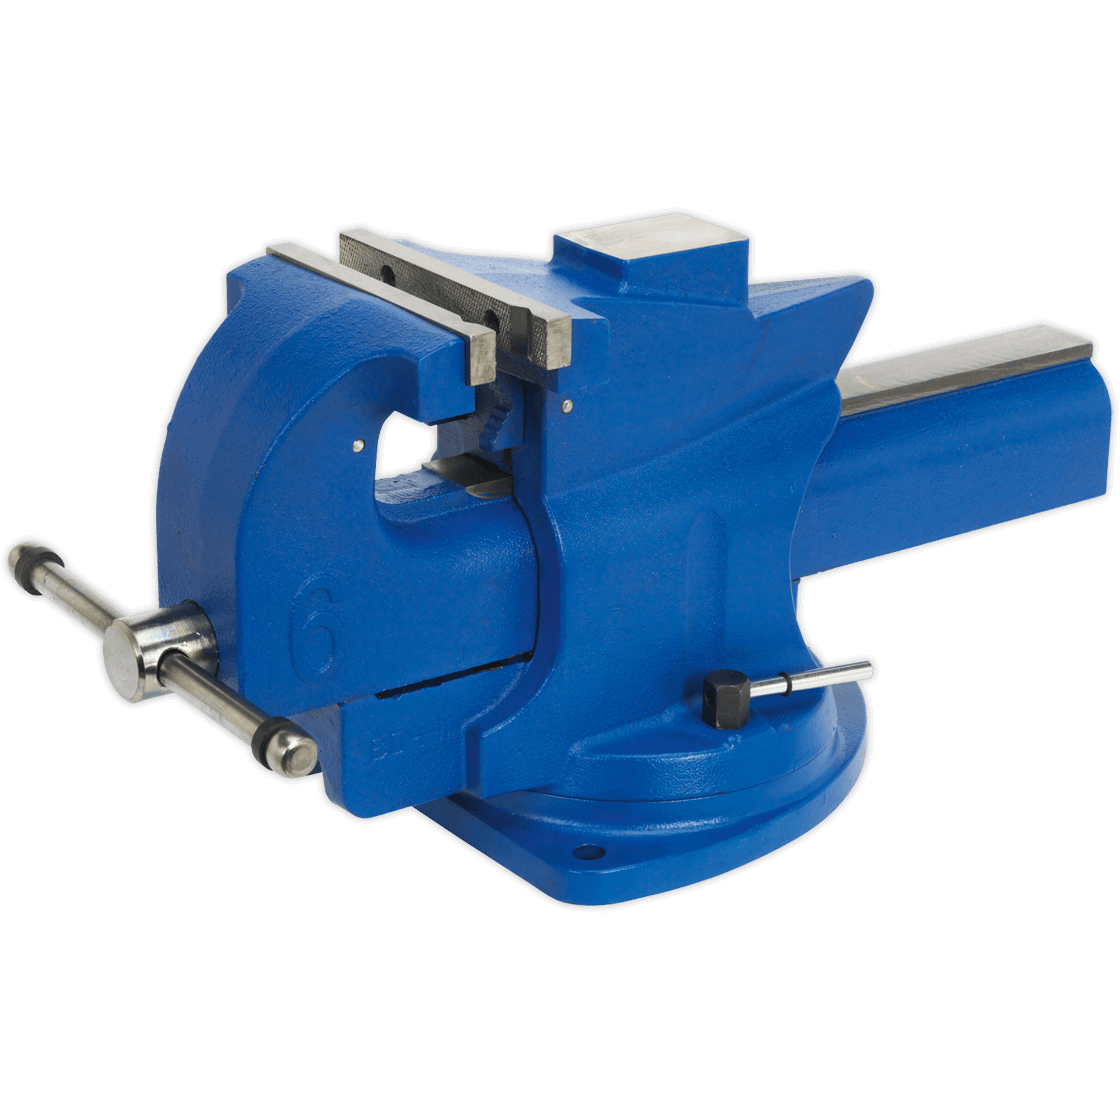 Sealey Cast Iron Bench Vice | Bench Vices